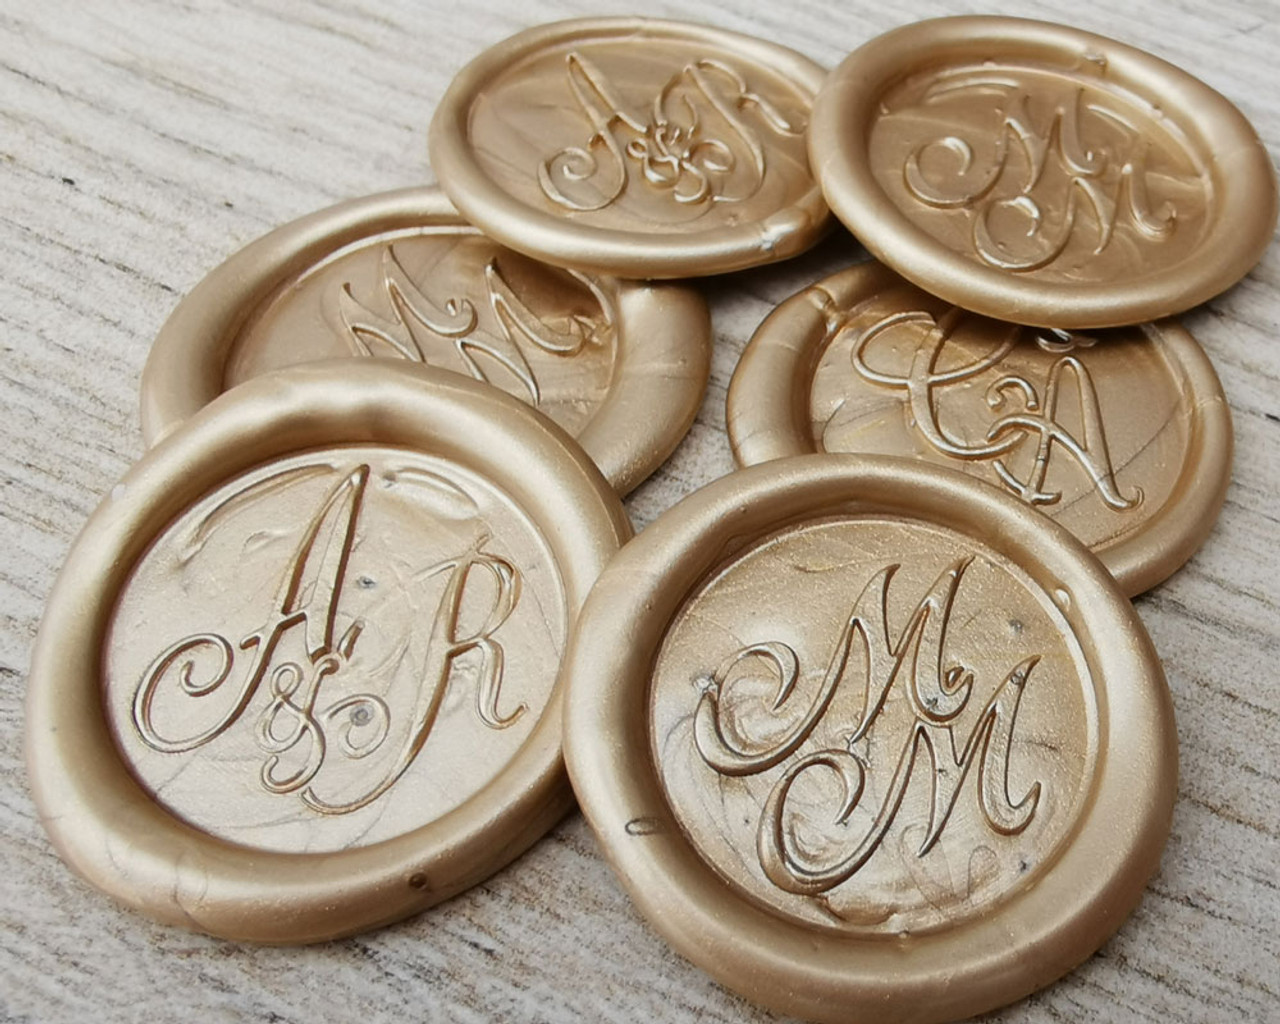 Adhesive Initial Wax Seal Stickers 25PK - 1 1/4 Gold